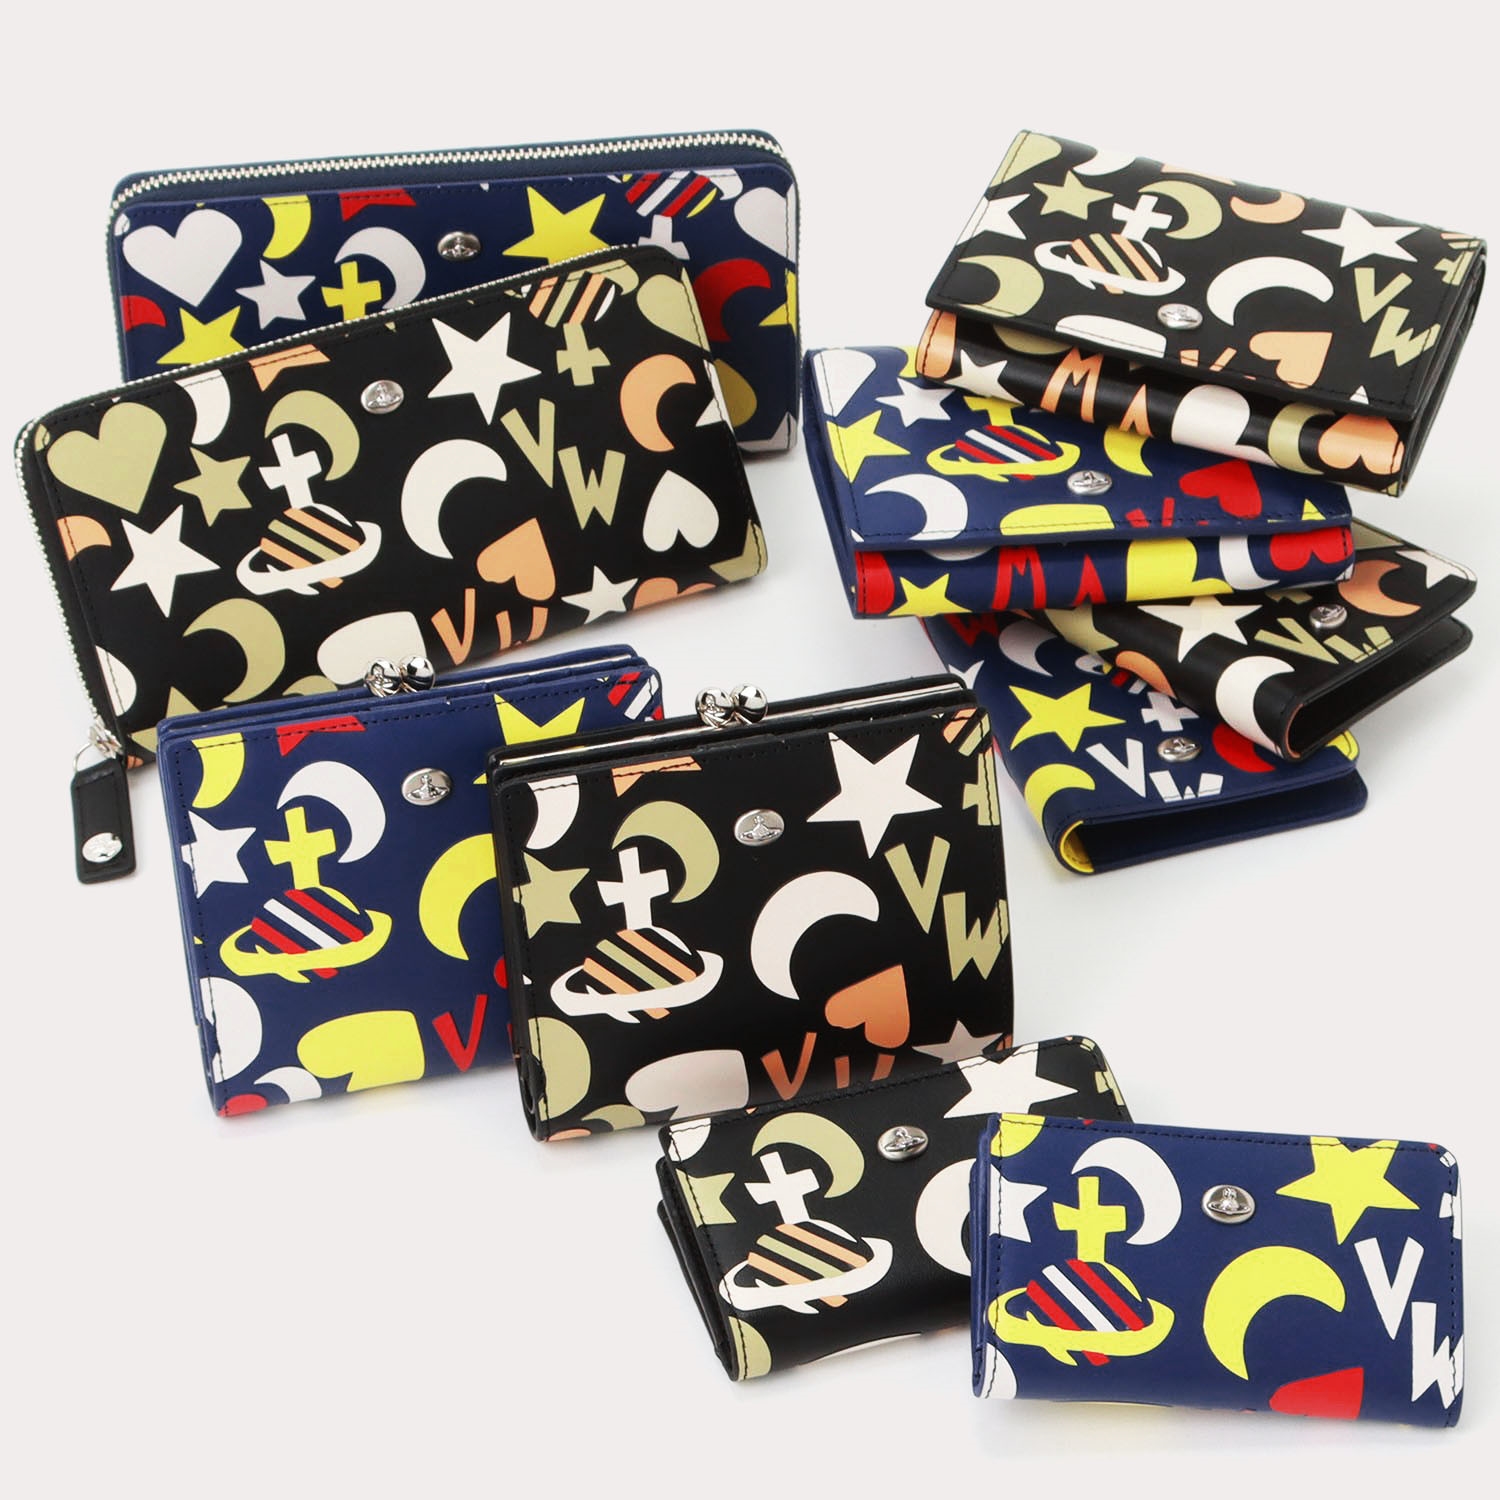 “STAR HEART MOON LEATHER GOODS” New Arrival